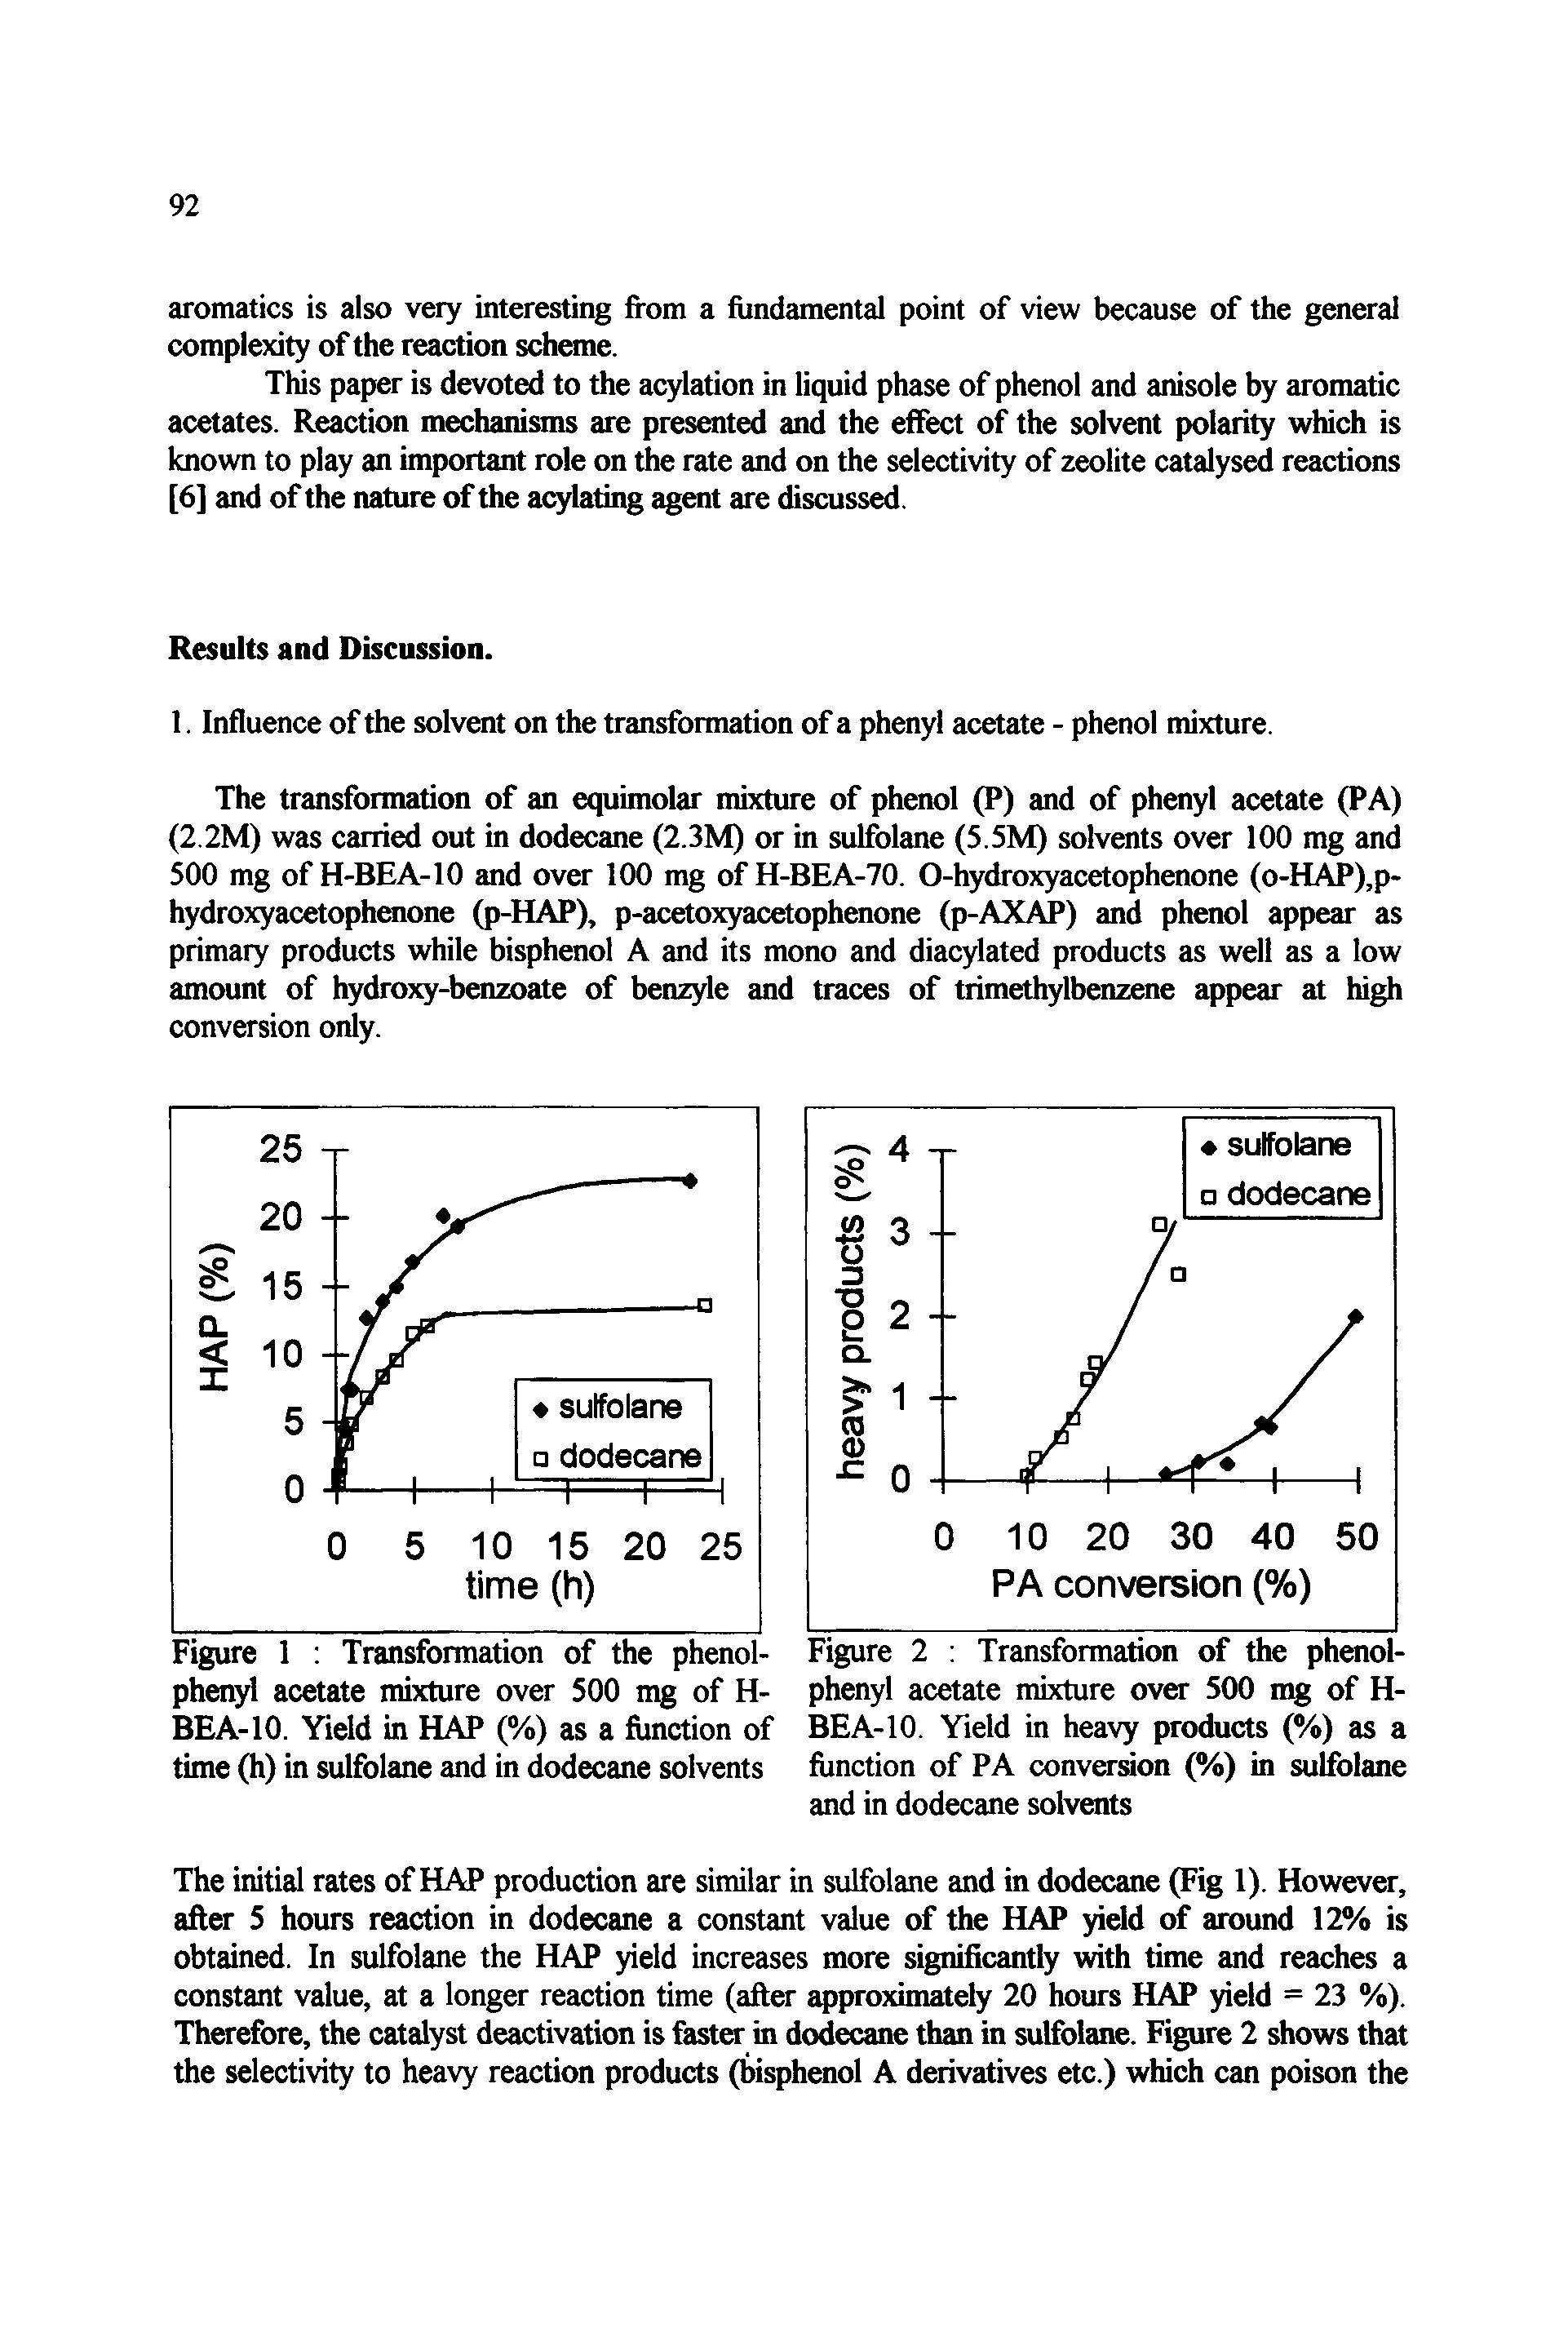 Figure 1 Transformation of the phenol-phenyl acetate mixture over 500 mg of H-BEA-10. Yield in HAP (%) as a function of time (h) in sulfolane and in dodecane solvents...